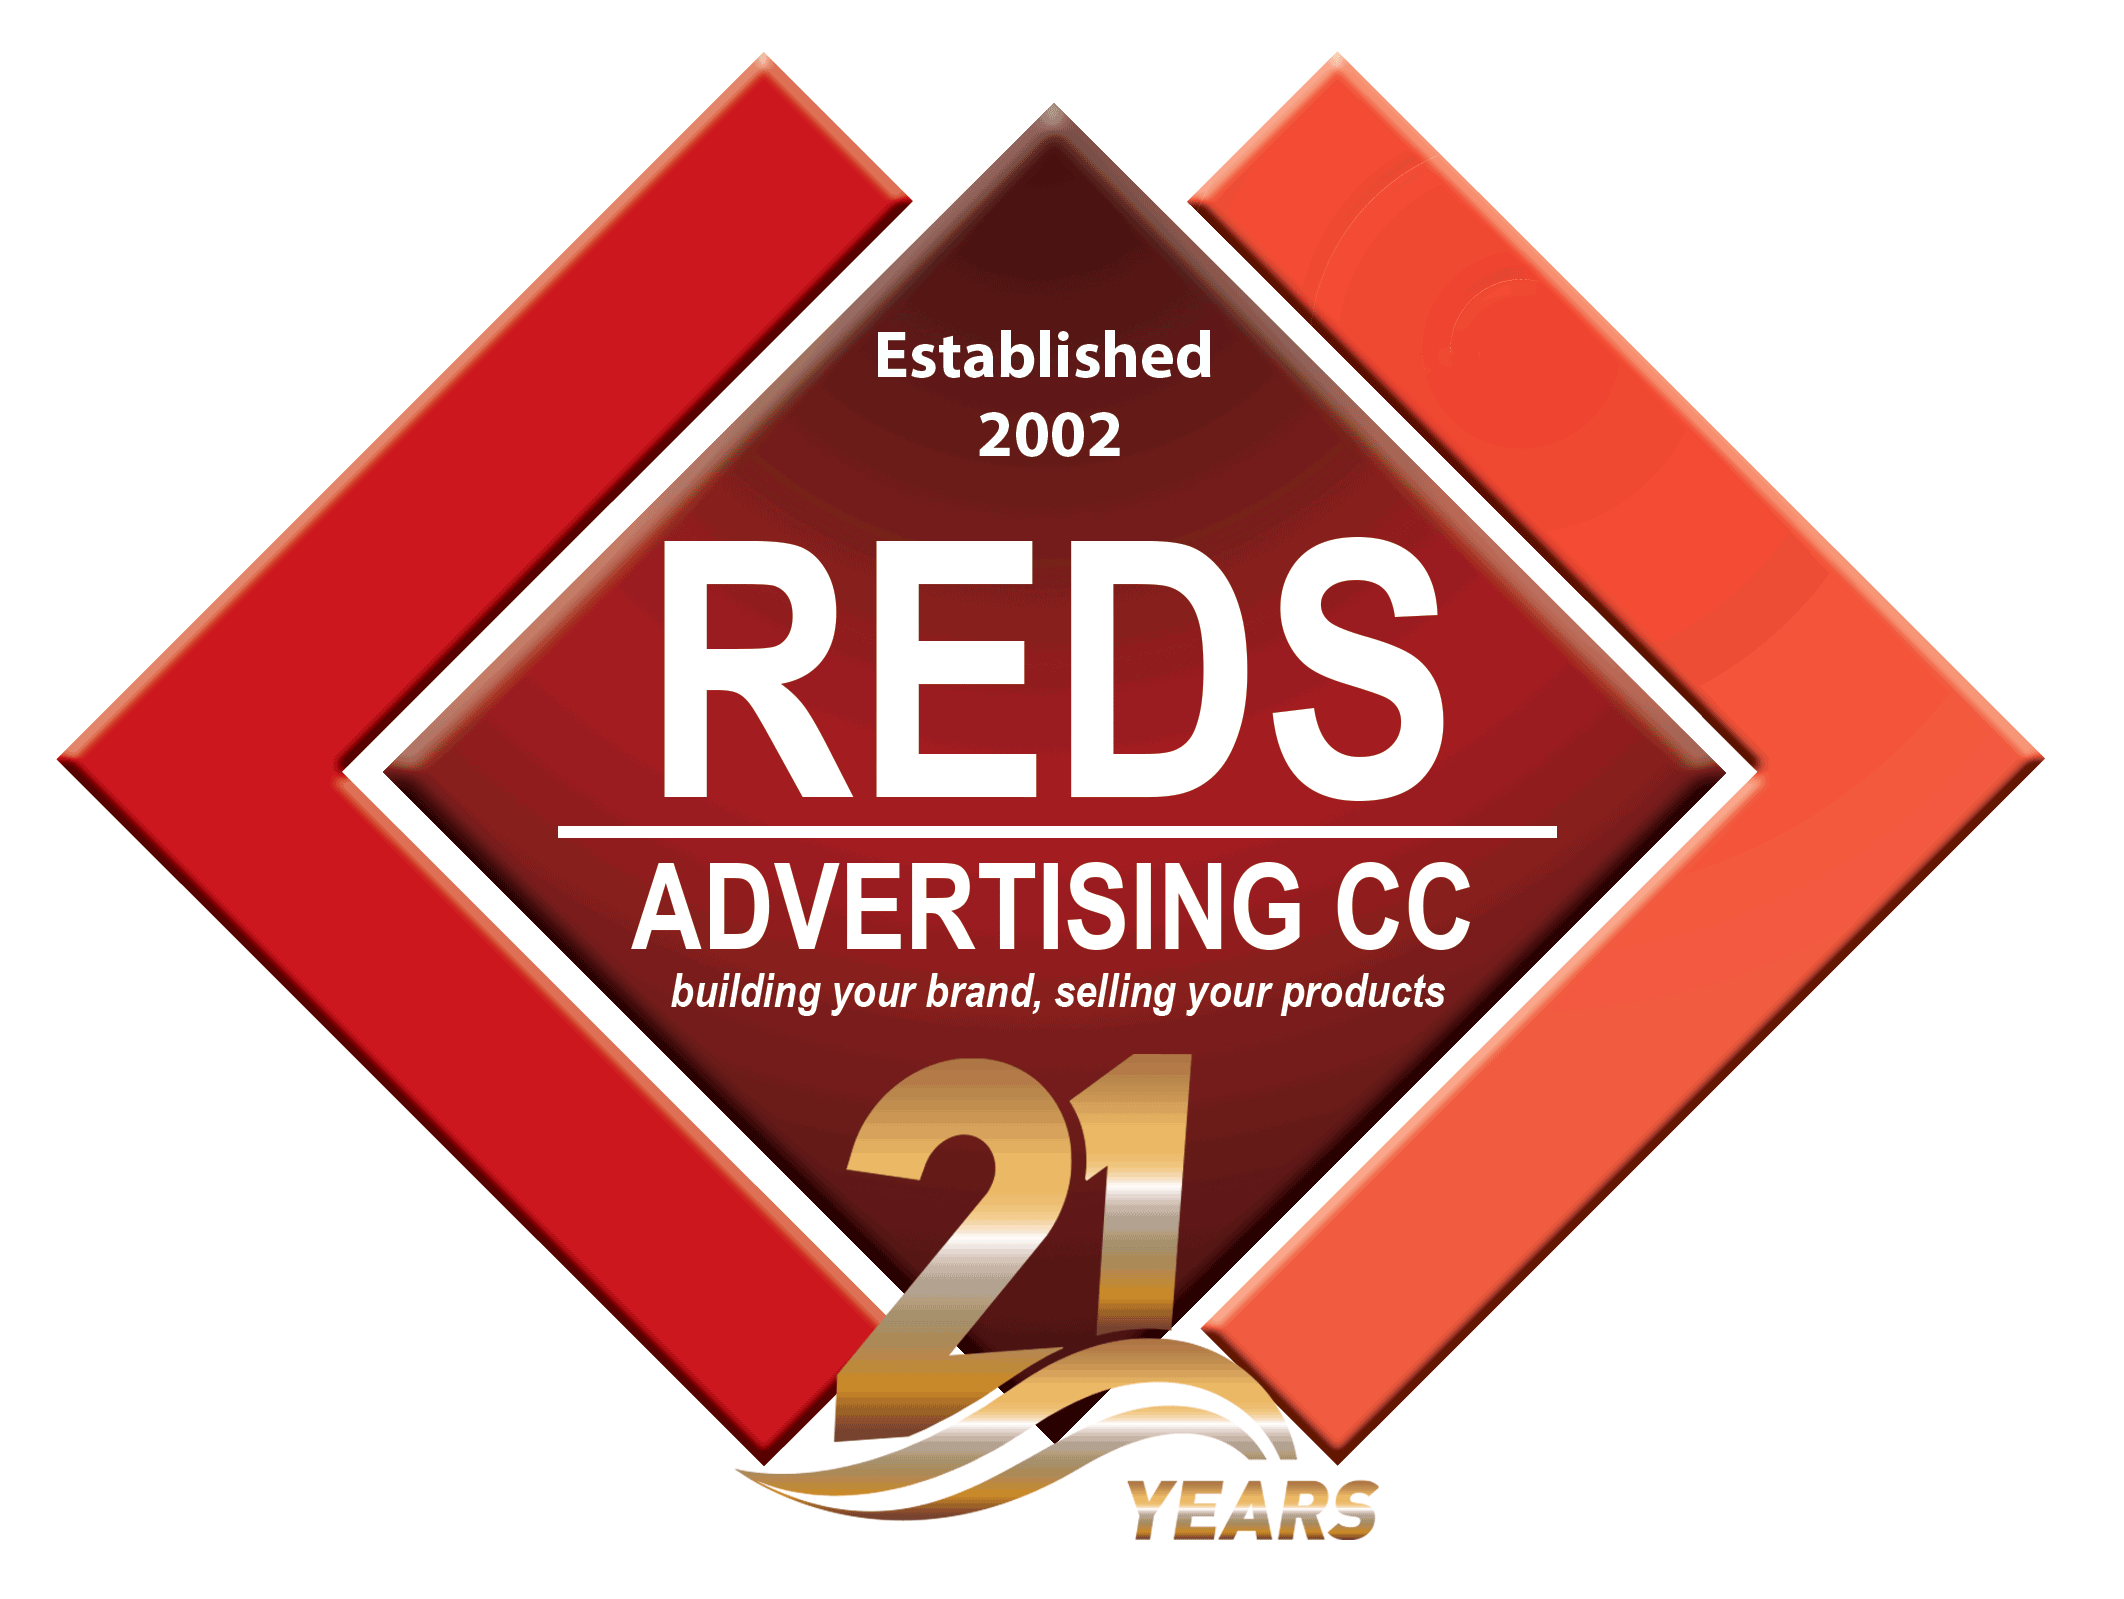 Reds Advertising- About Us